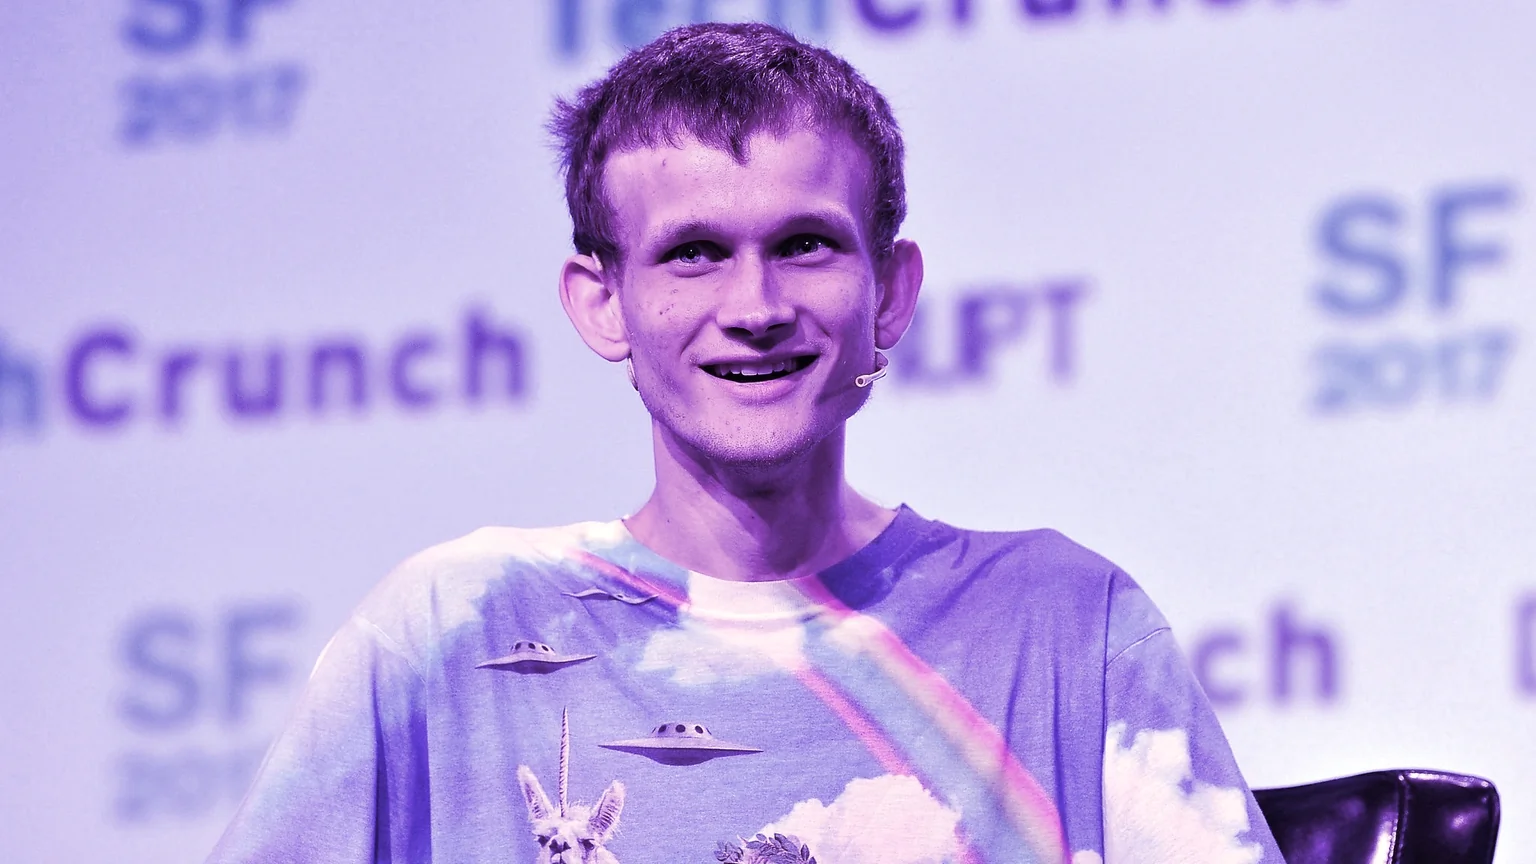 Vitalik Buterin is the co-founder of Ethereum. Image: Flickr